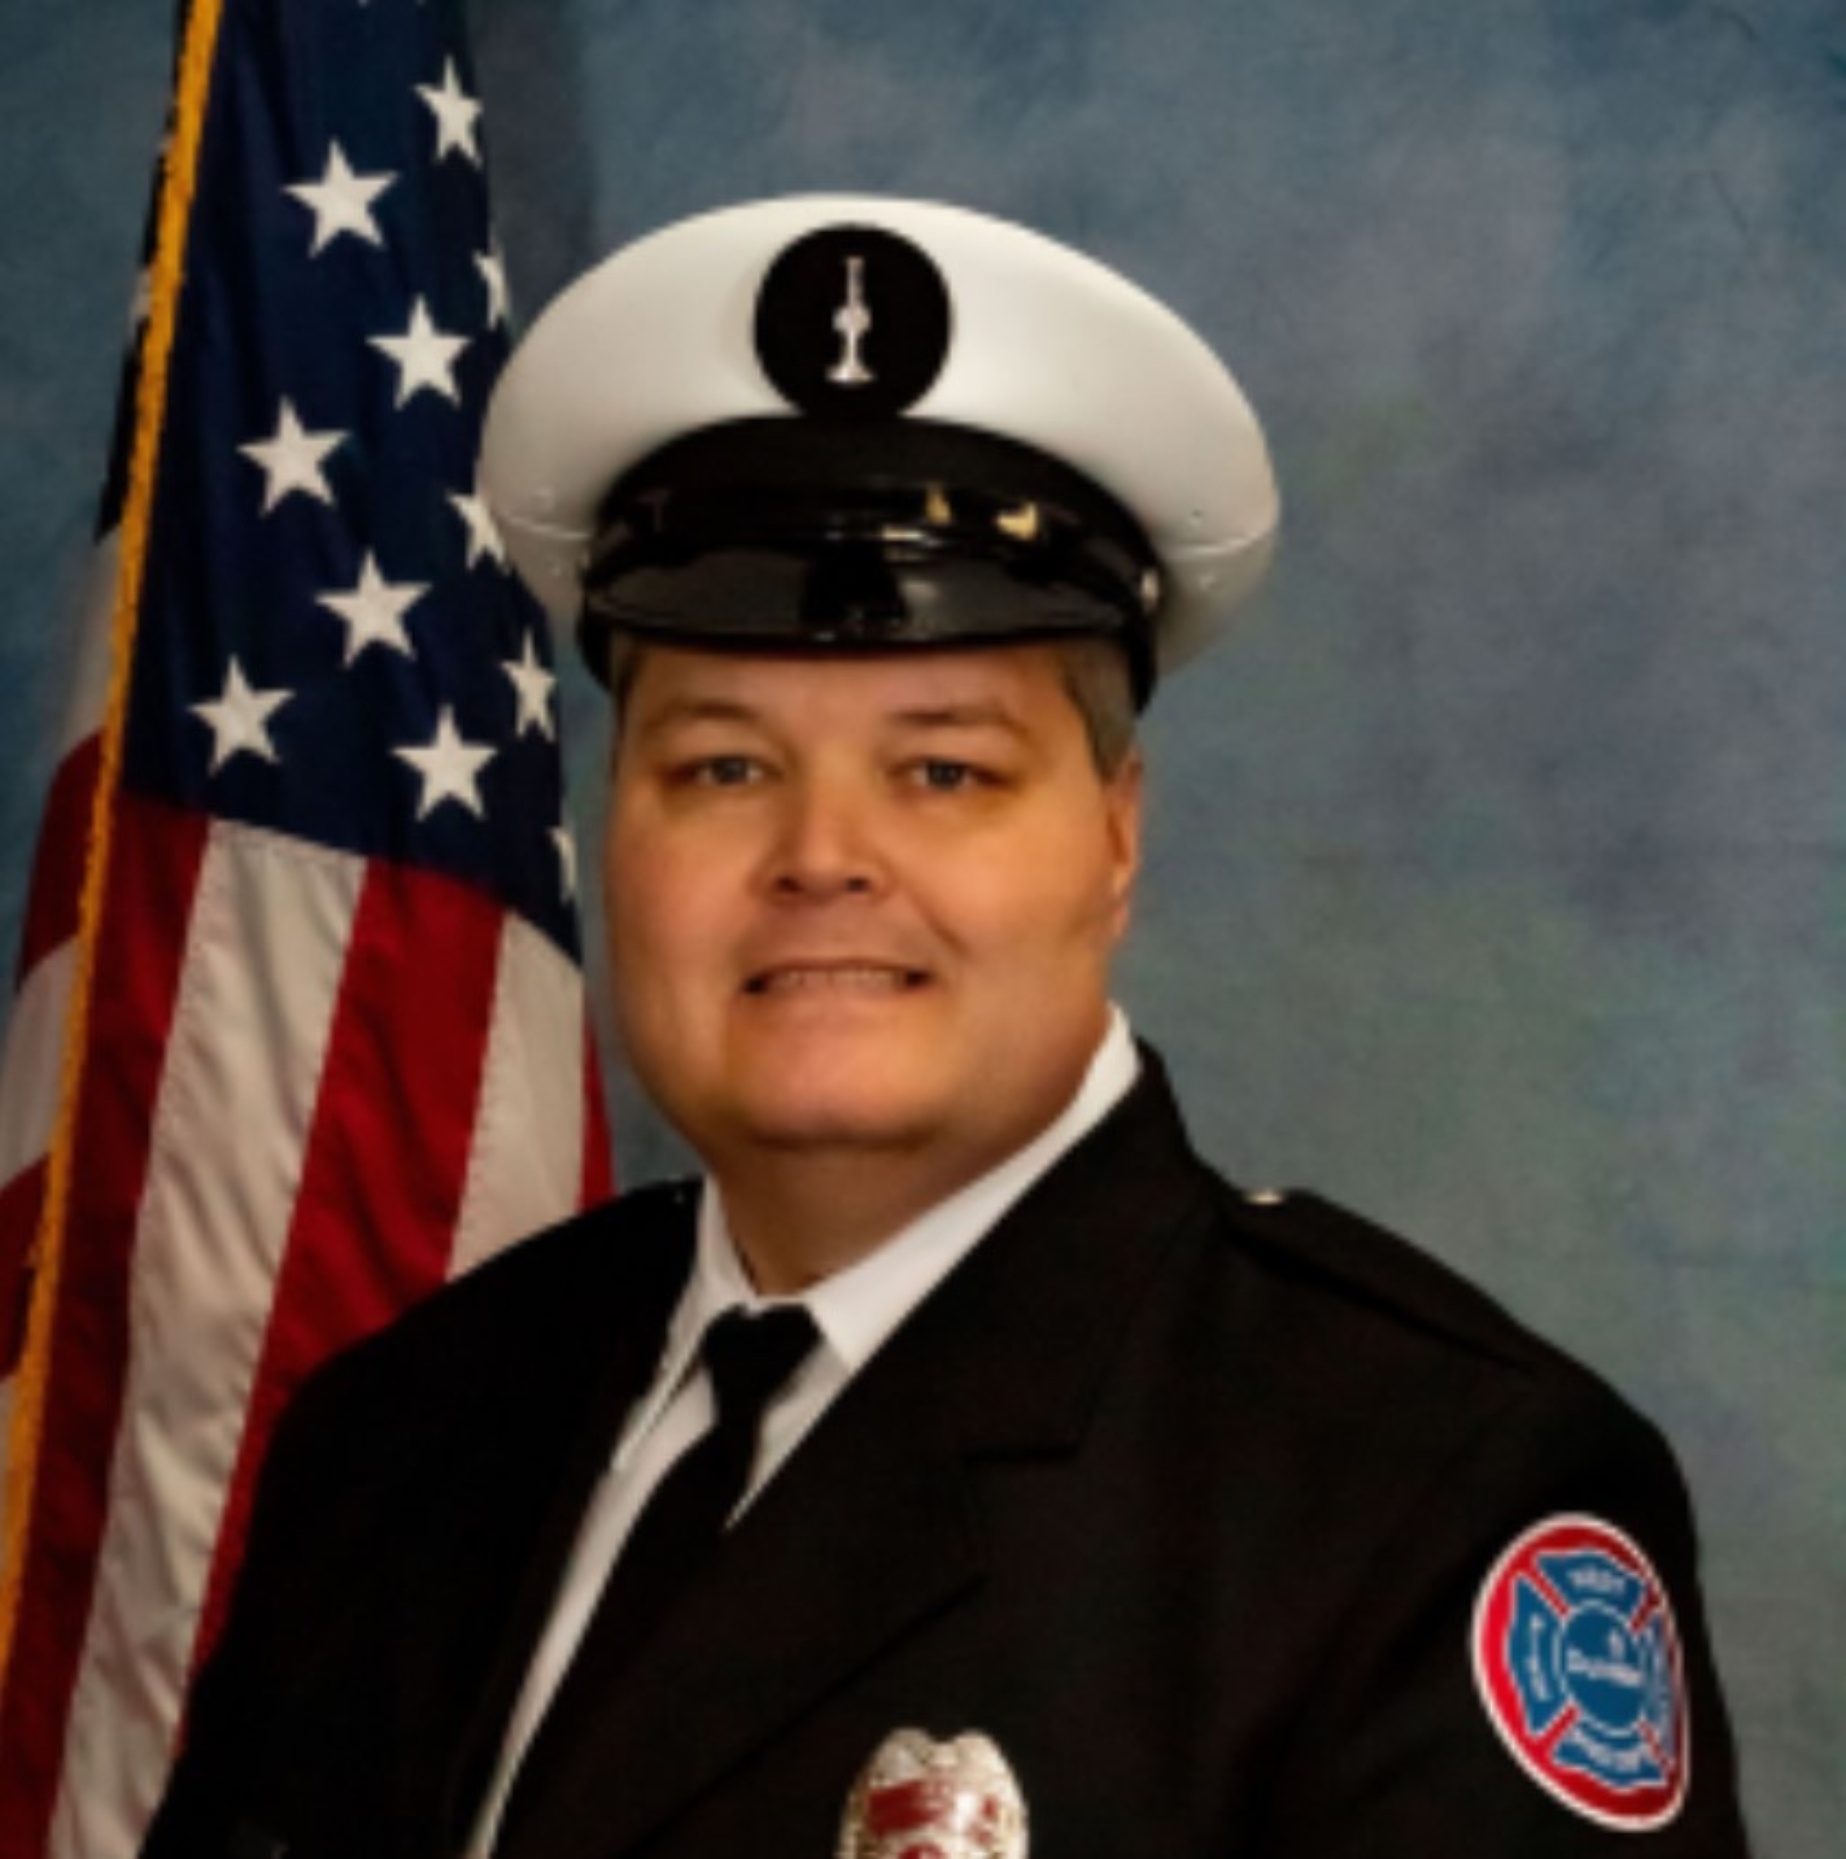 West Dundee Fire Department Capt. Dan Kilian, 46, lost his battle with cancer on March 10